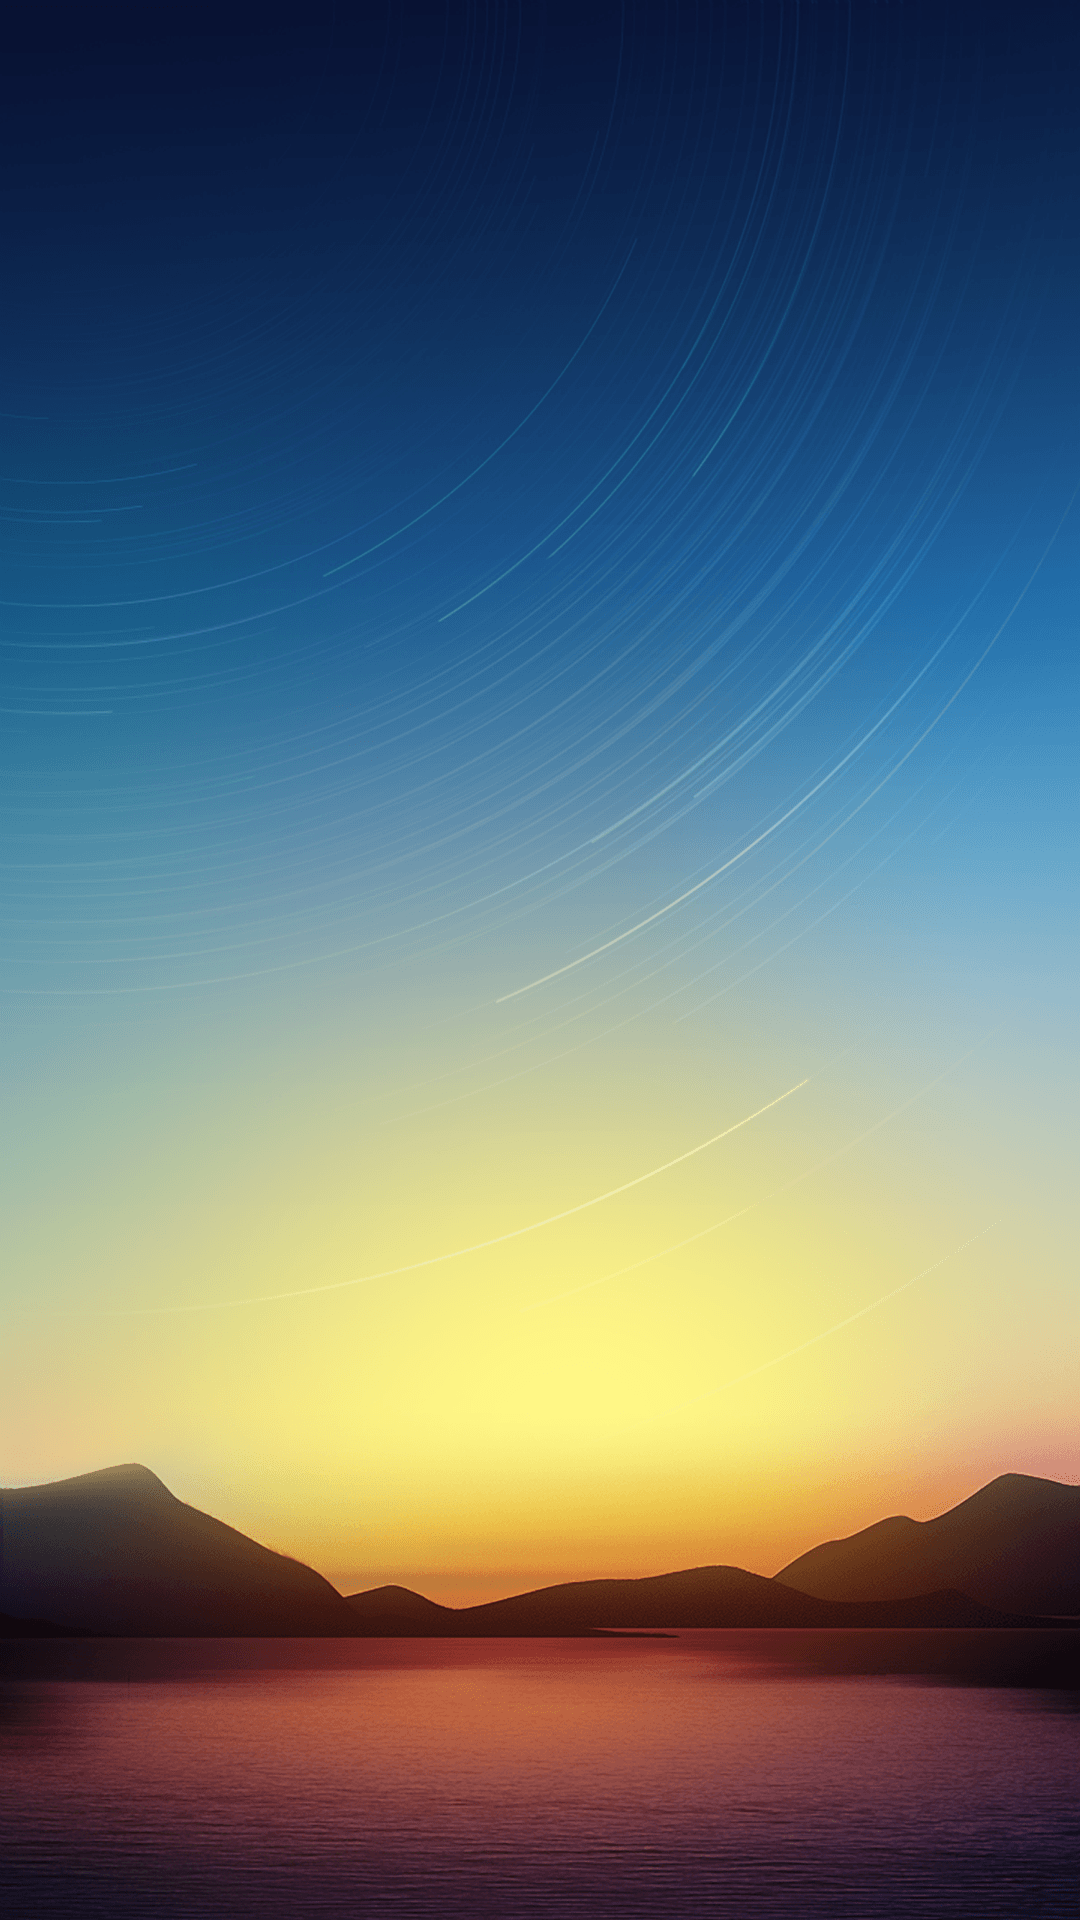 Sunset htc one wallpaper, free and easy to download